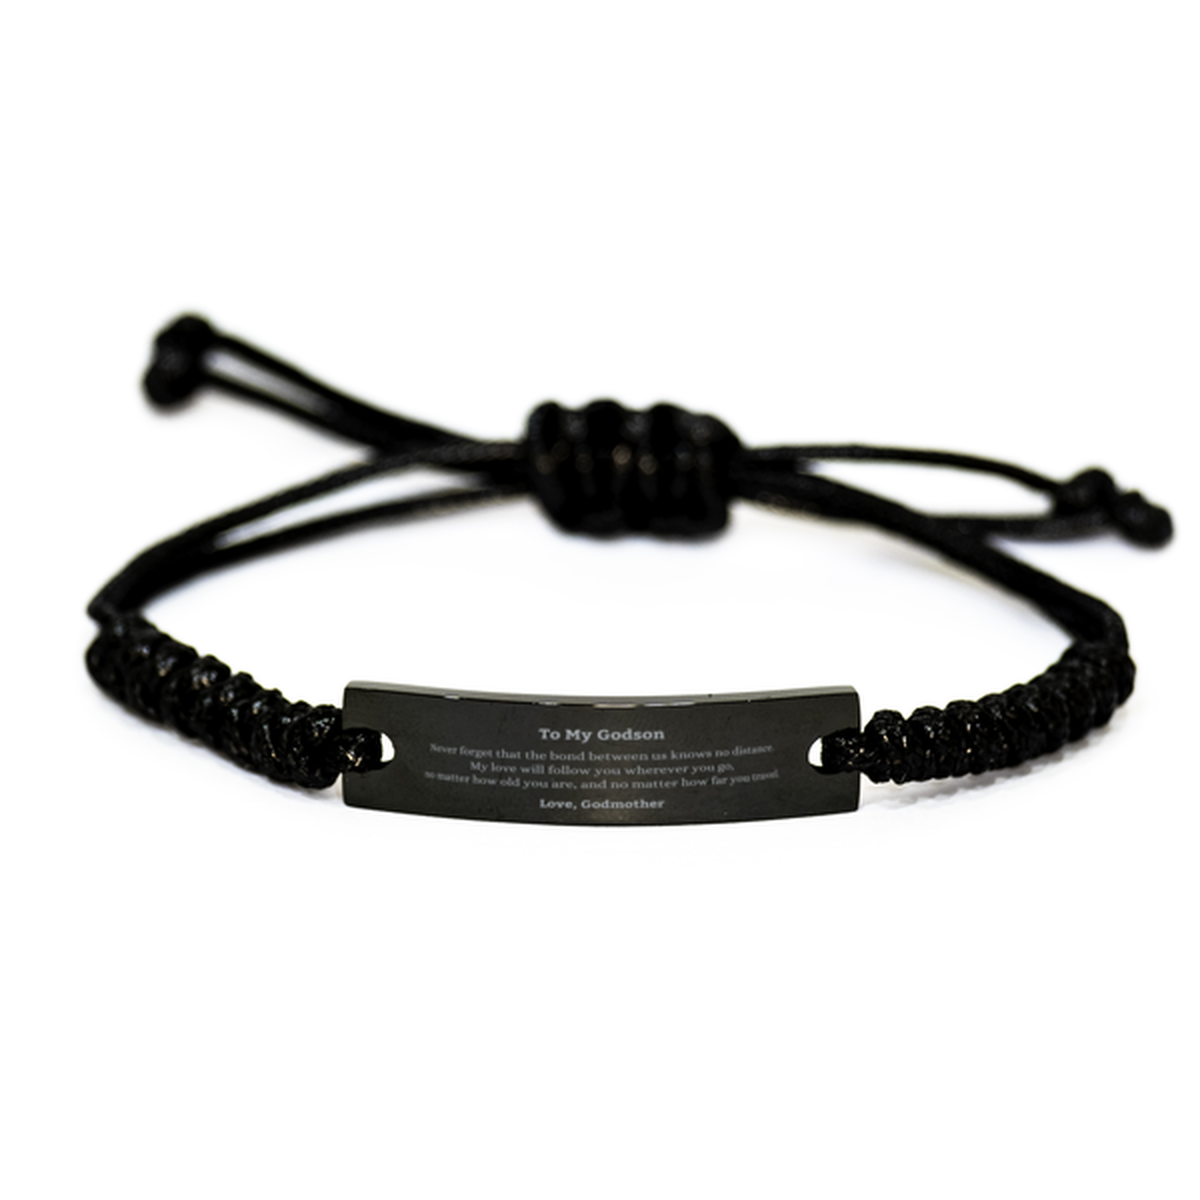 Godson Birthday Gifts from Godmother, Adjustable Black Rope Bracelet for Godson Christmas Graduation Unique Gifts Godson Never forget that the bond between us knows no distance. Love, Godmother